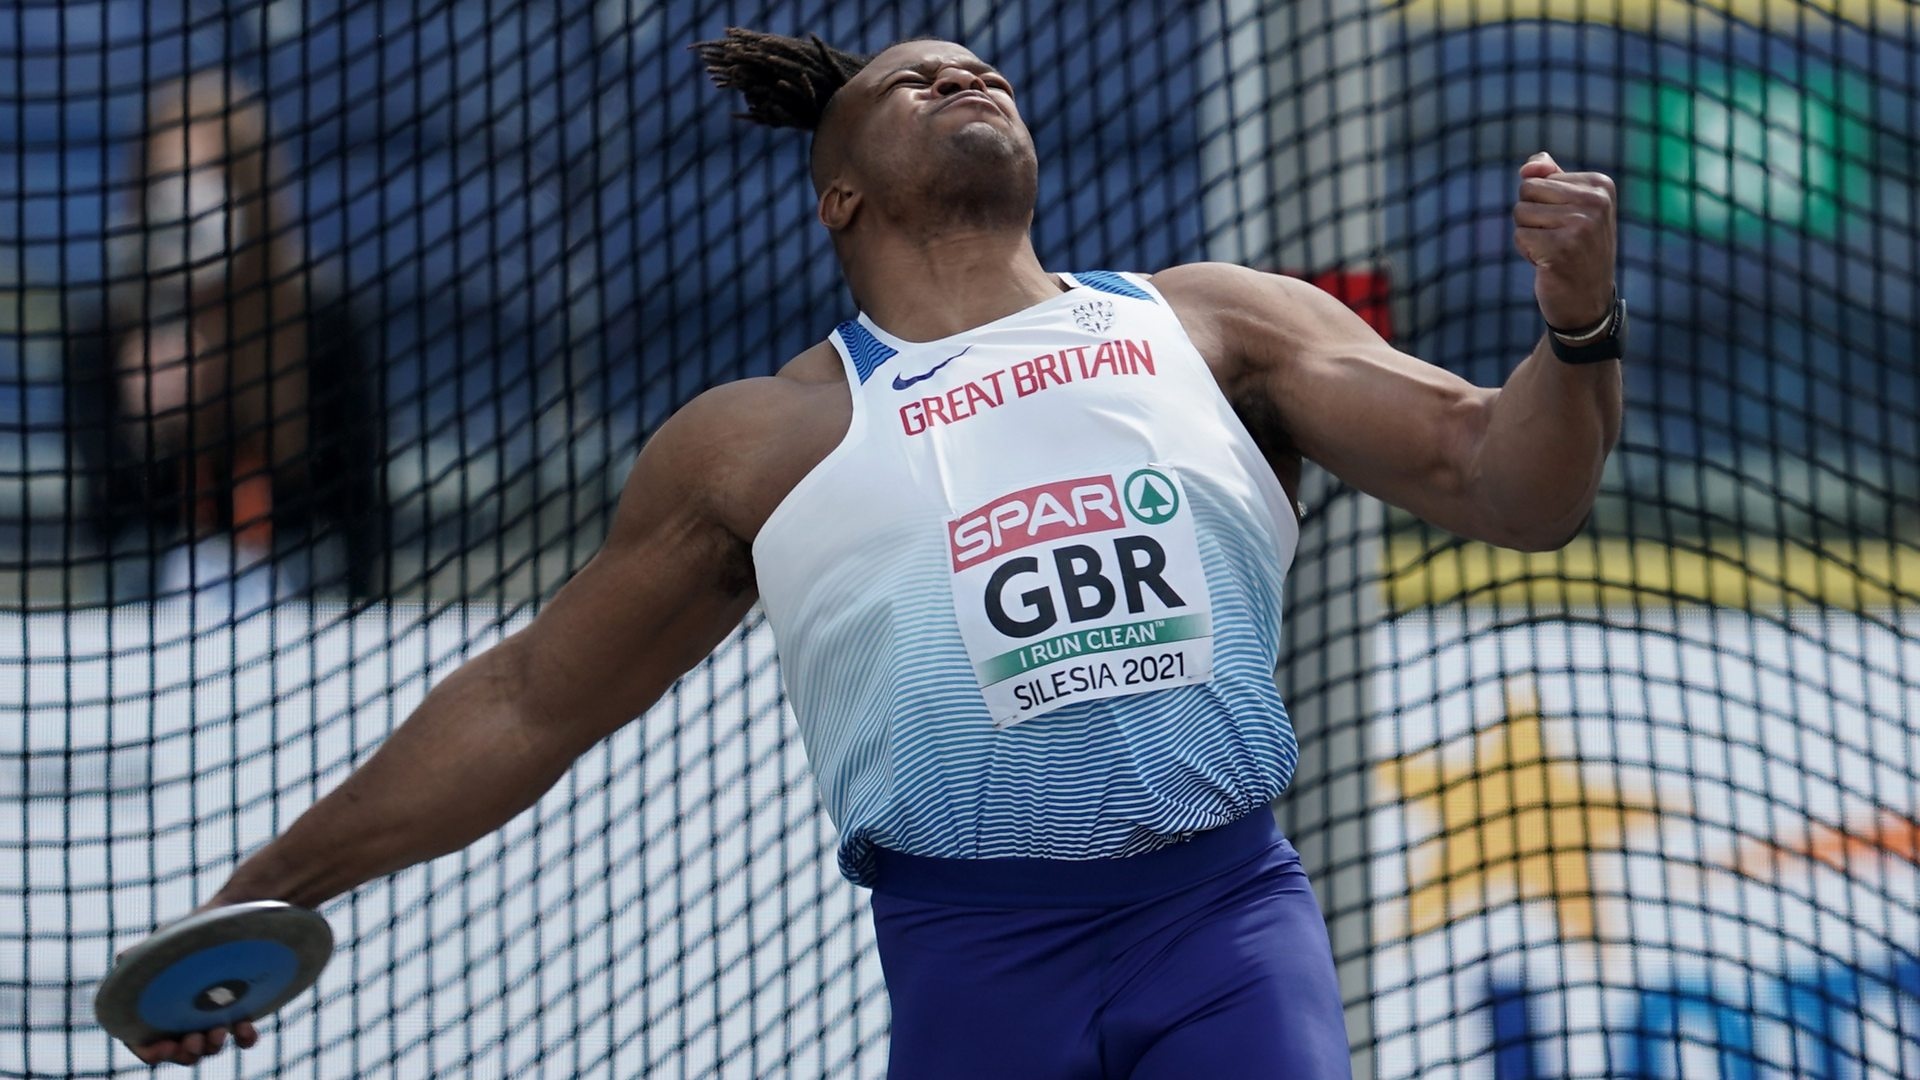 Discus Throw: European Team Championships, Lawrence Okoye, First discus event victory for GB, Silesia 2021. 1920x1080 Full HD Wallpaper.